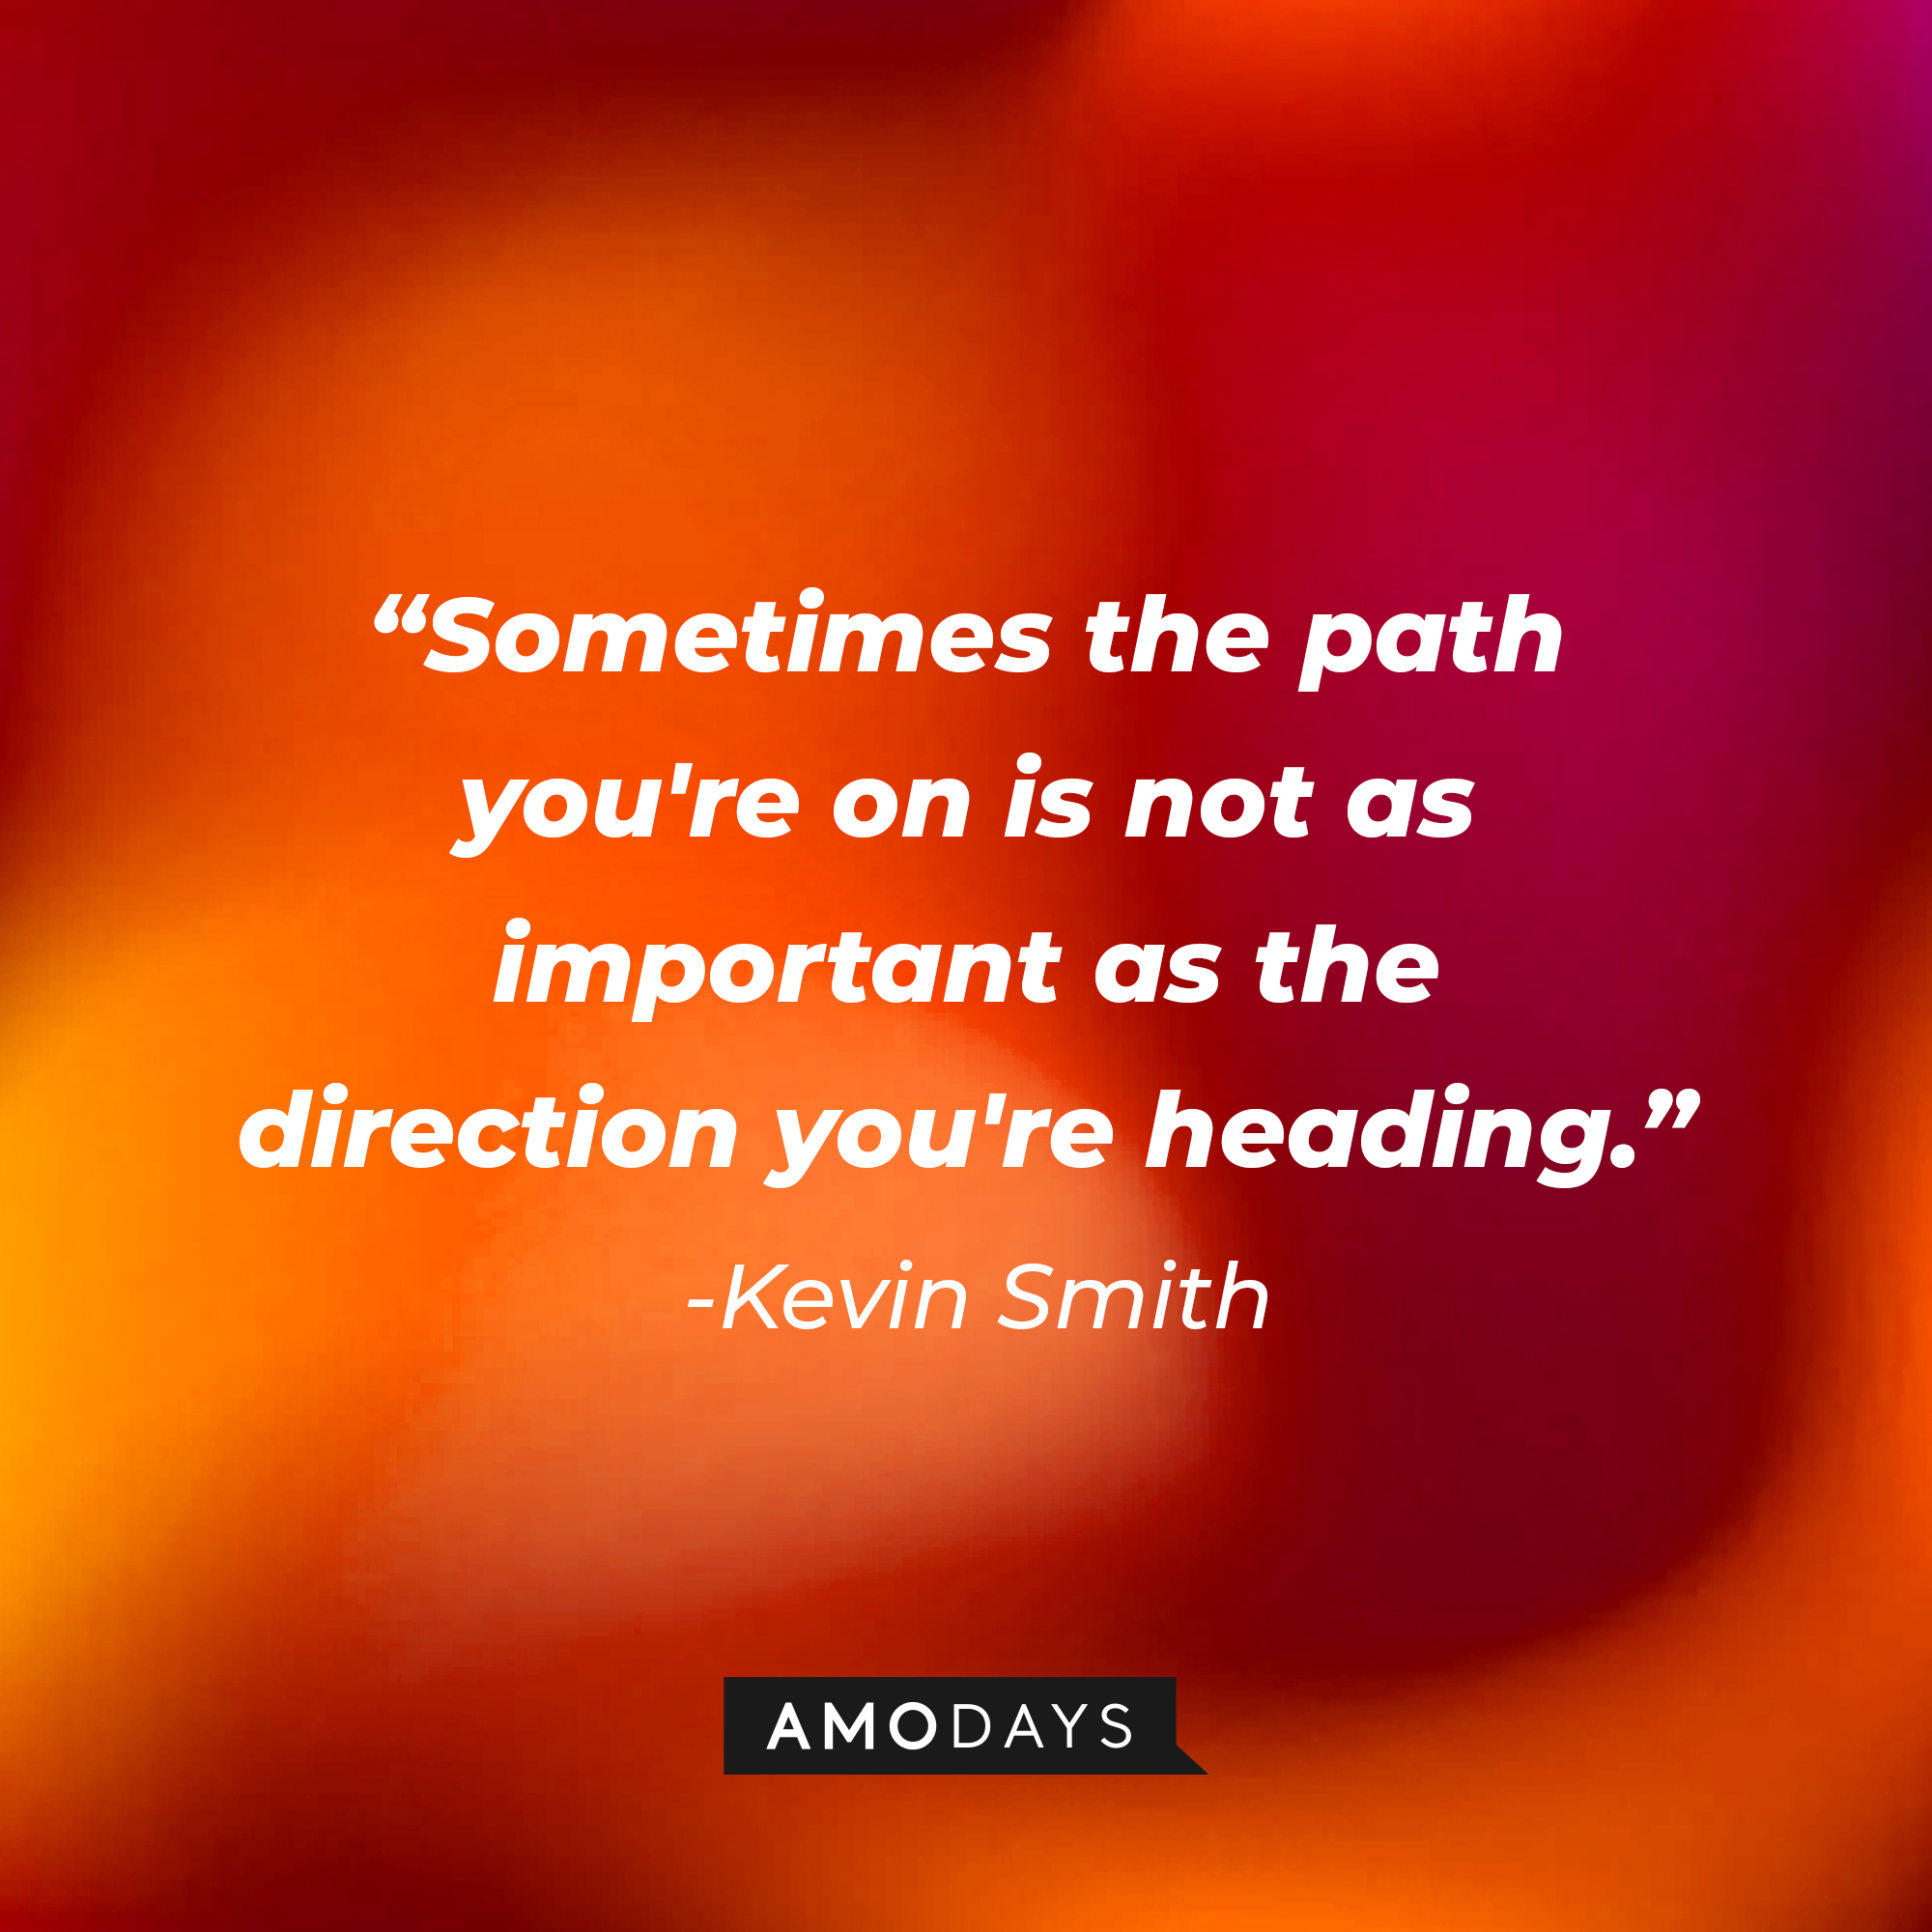 Kevin Smith's quote: “Sometimes the path you're on is not as important as the direction you're heading.” | Source: AmoDays